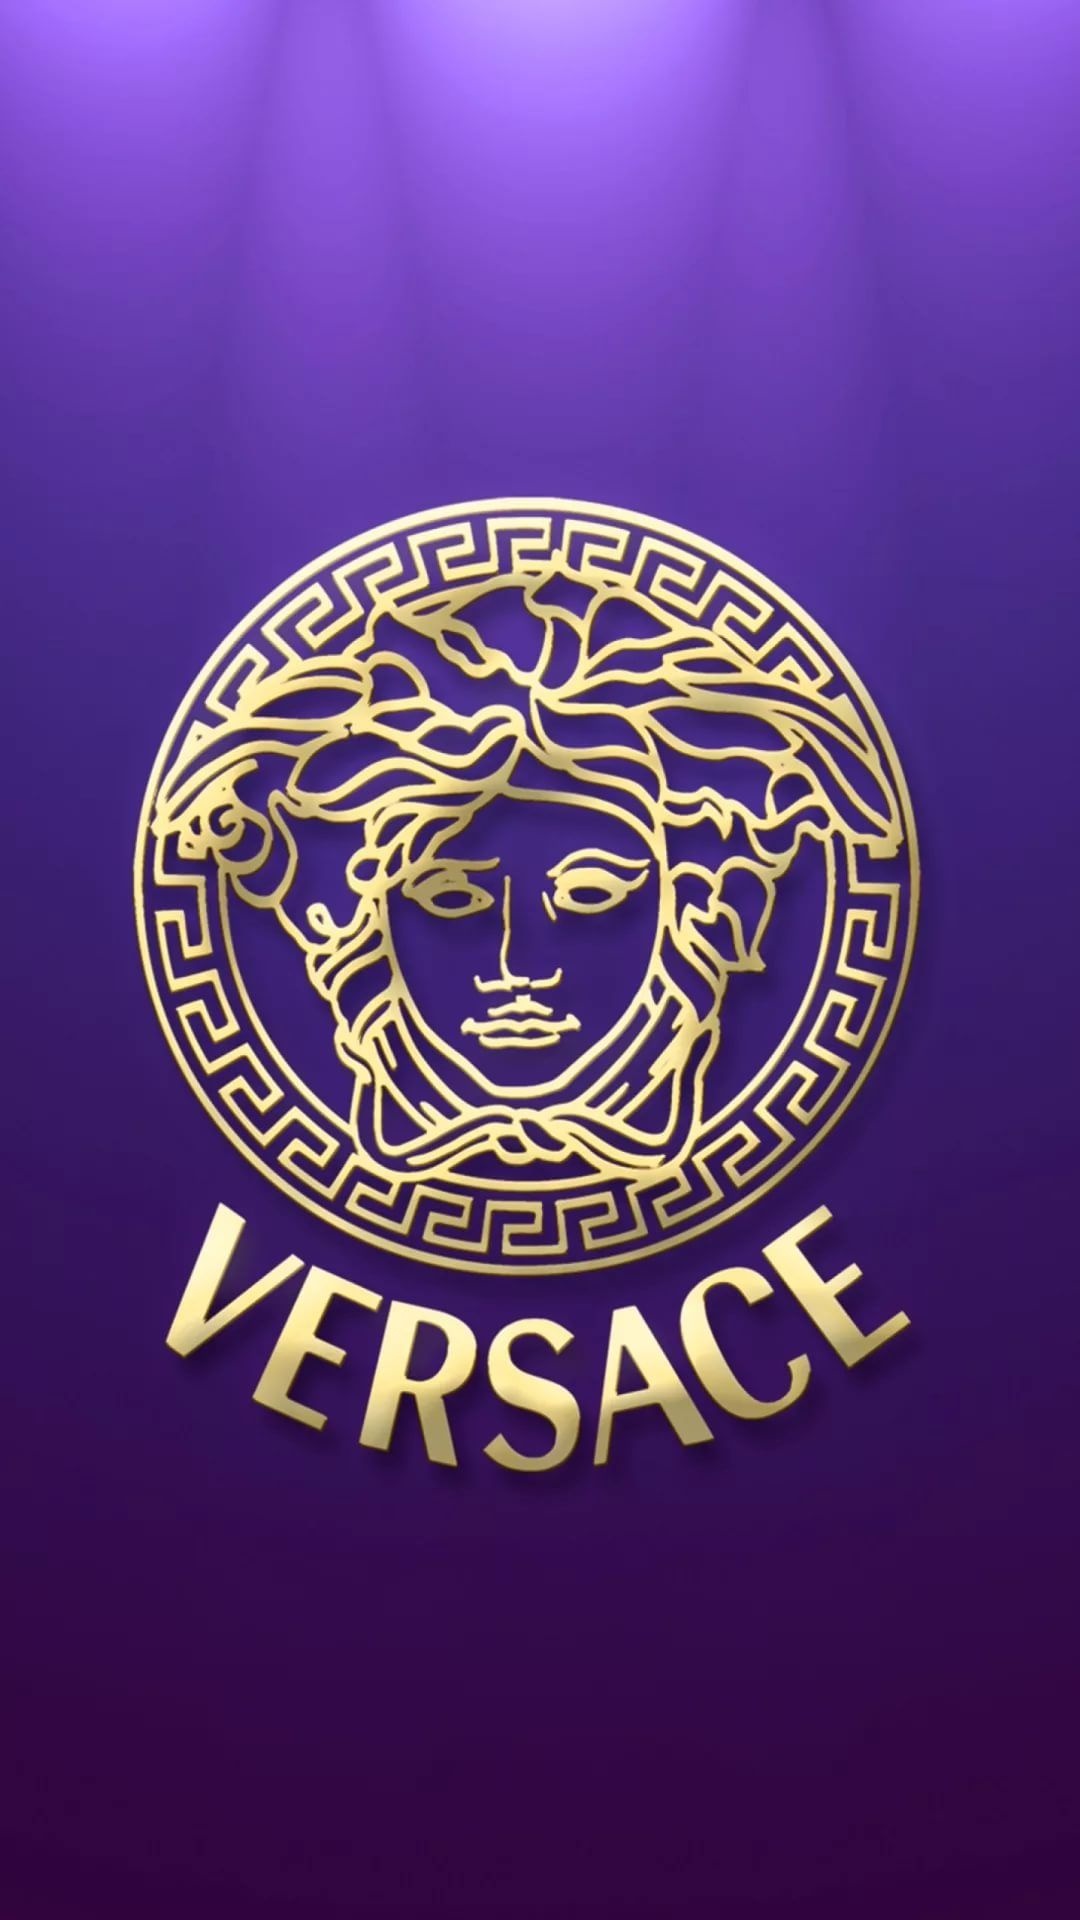 Versace: A leading luxury, fashion and lifestyle brand, Recognized for its powerful and innovative mark. 1080x1920 Full HD Wallpaper.